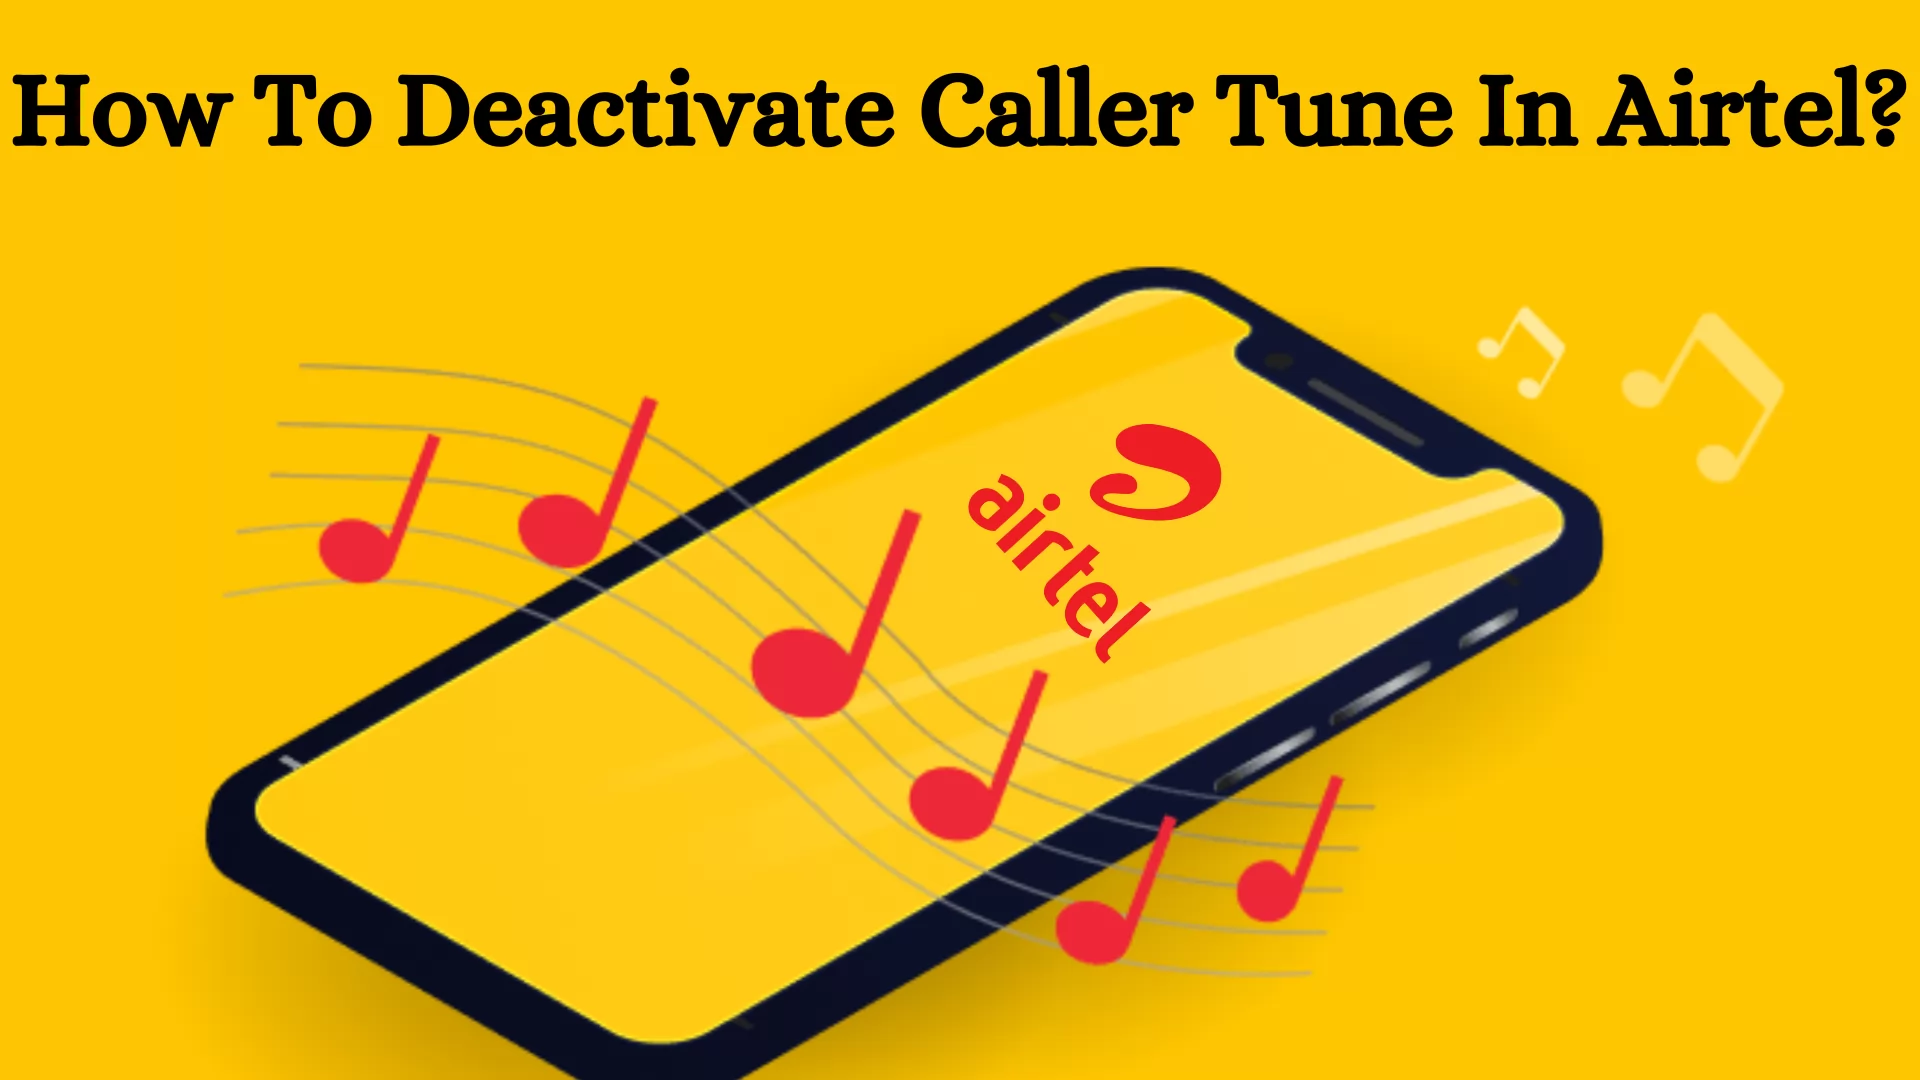 How To Deactivate Caller Tune In Airtel? 